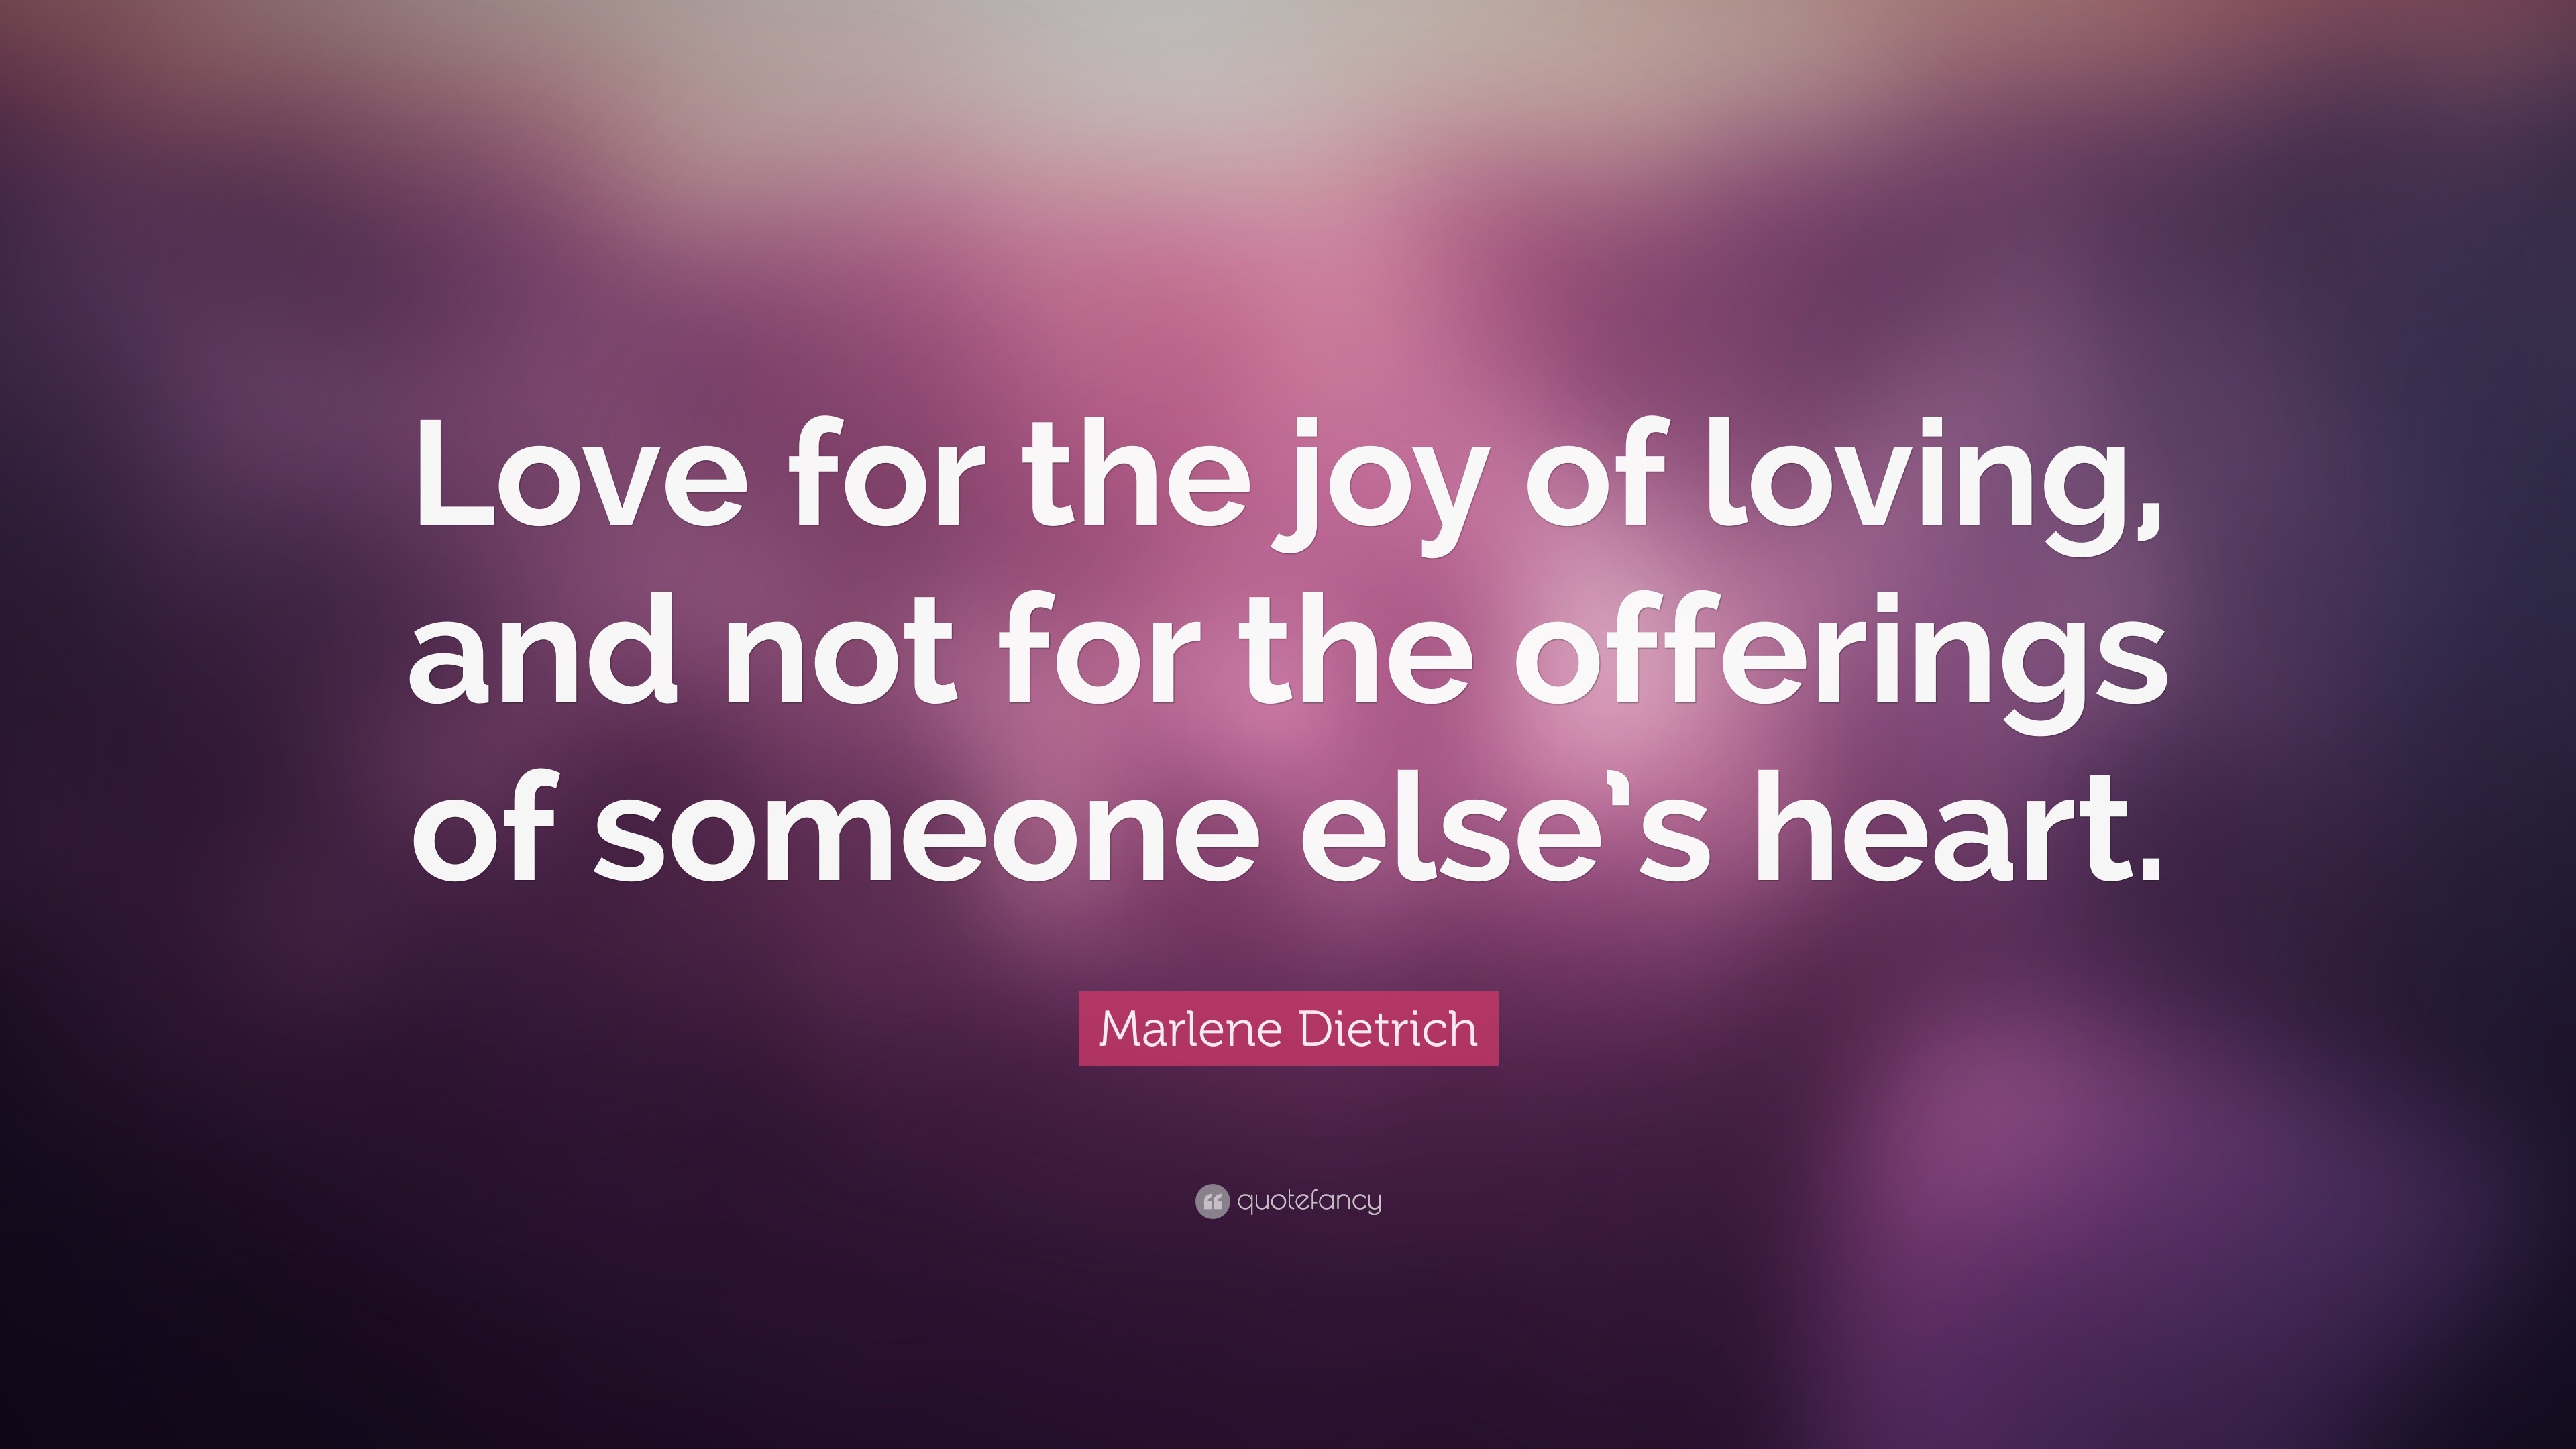 Marlene Dietrich Quote “Love for the joy of loving and not for the